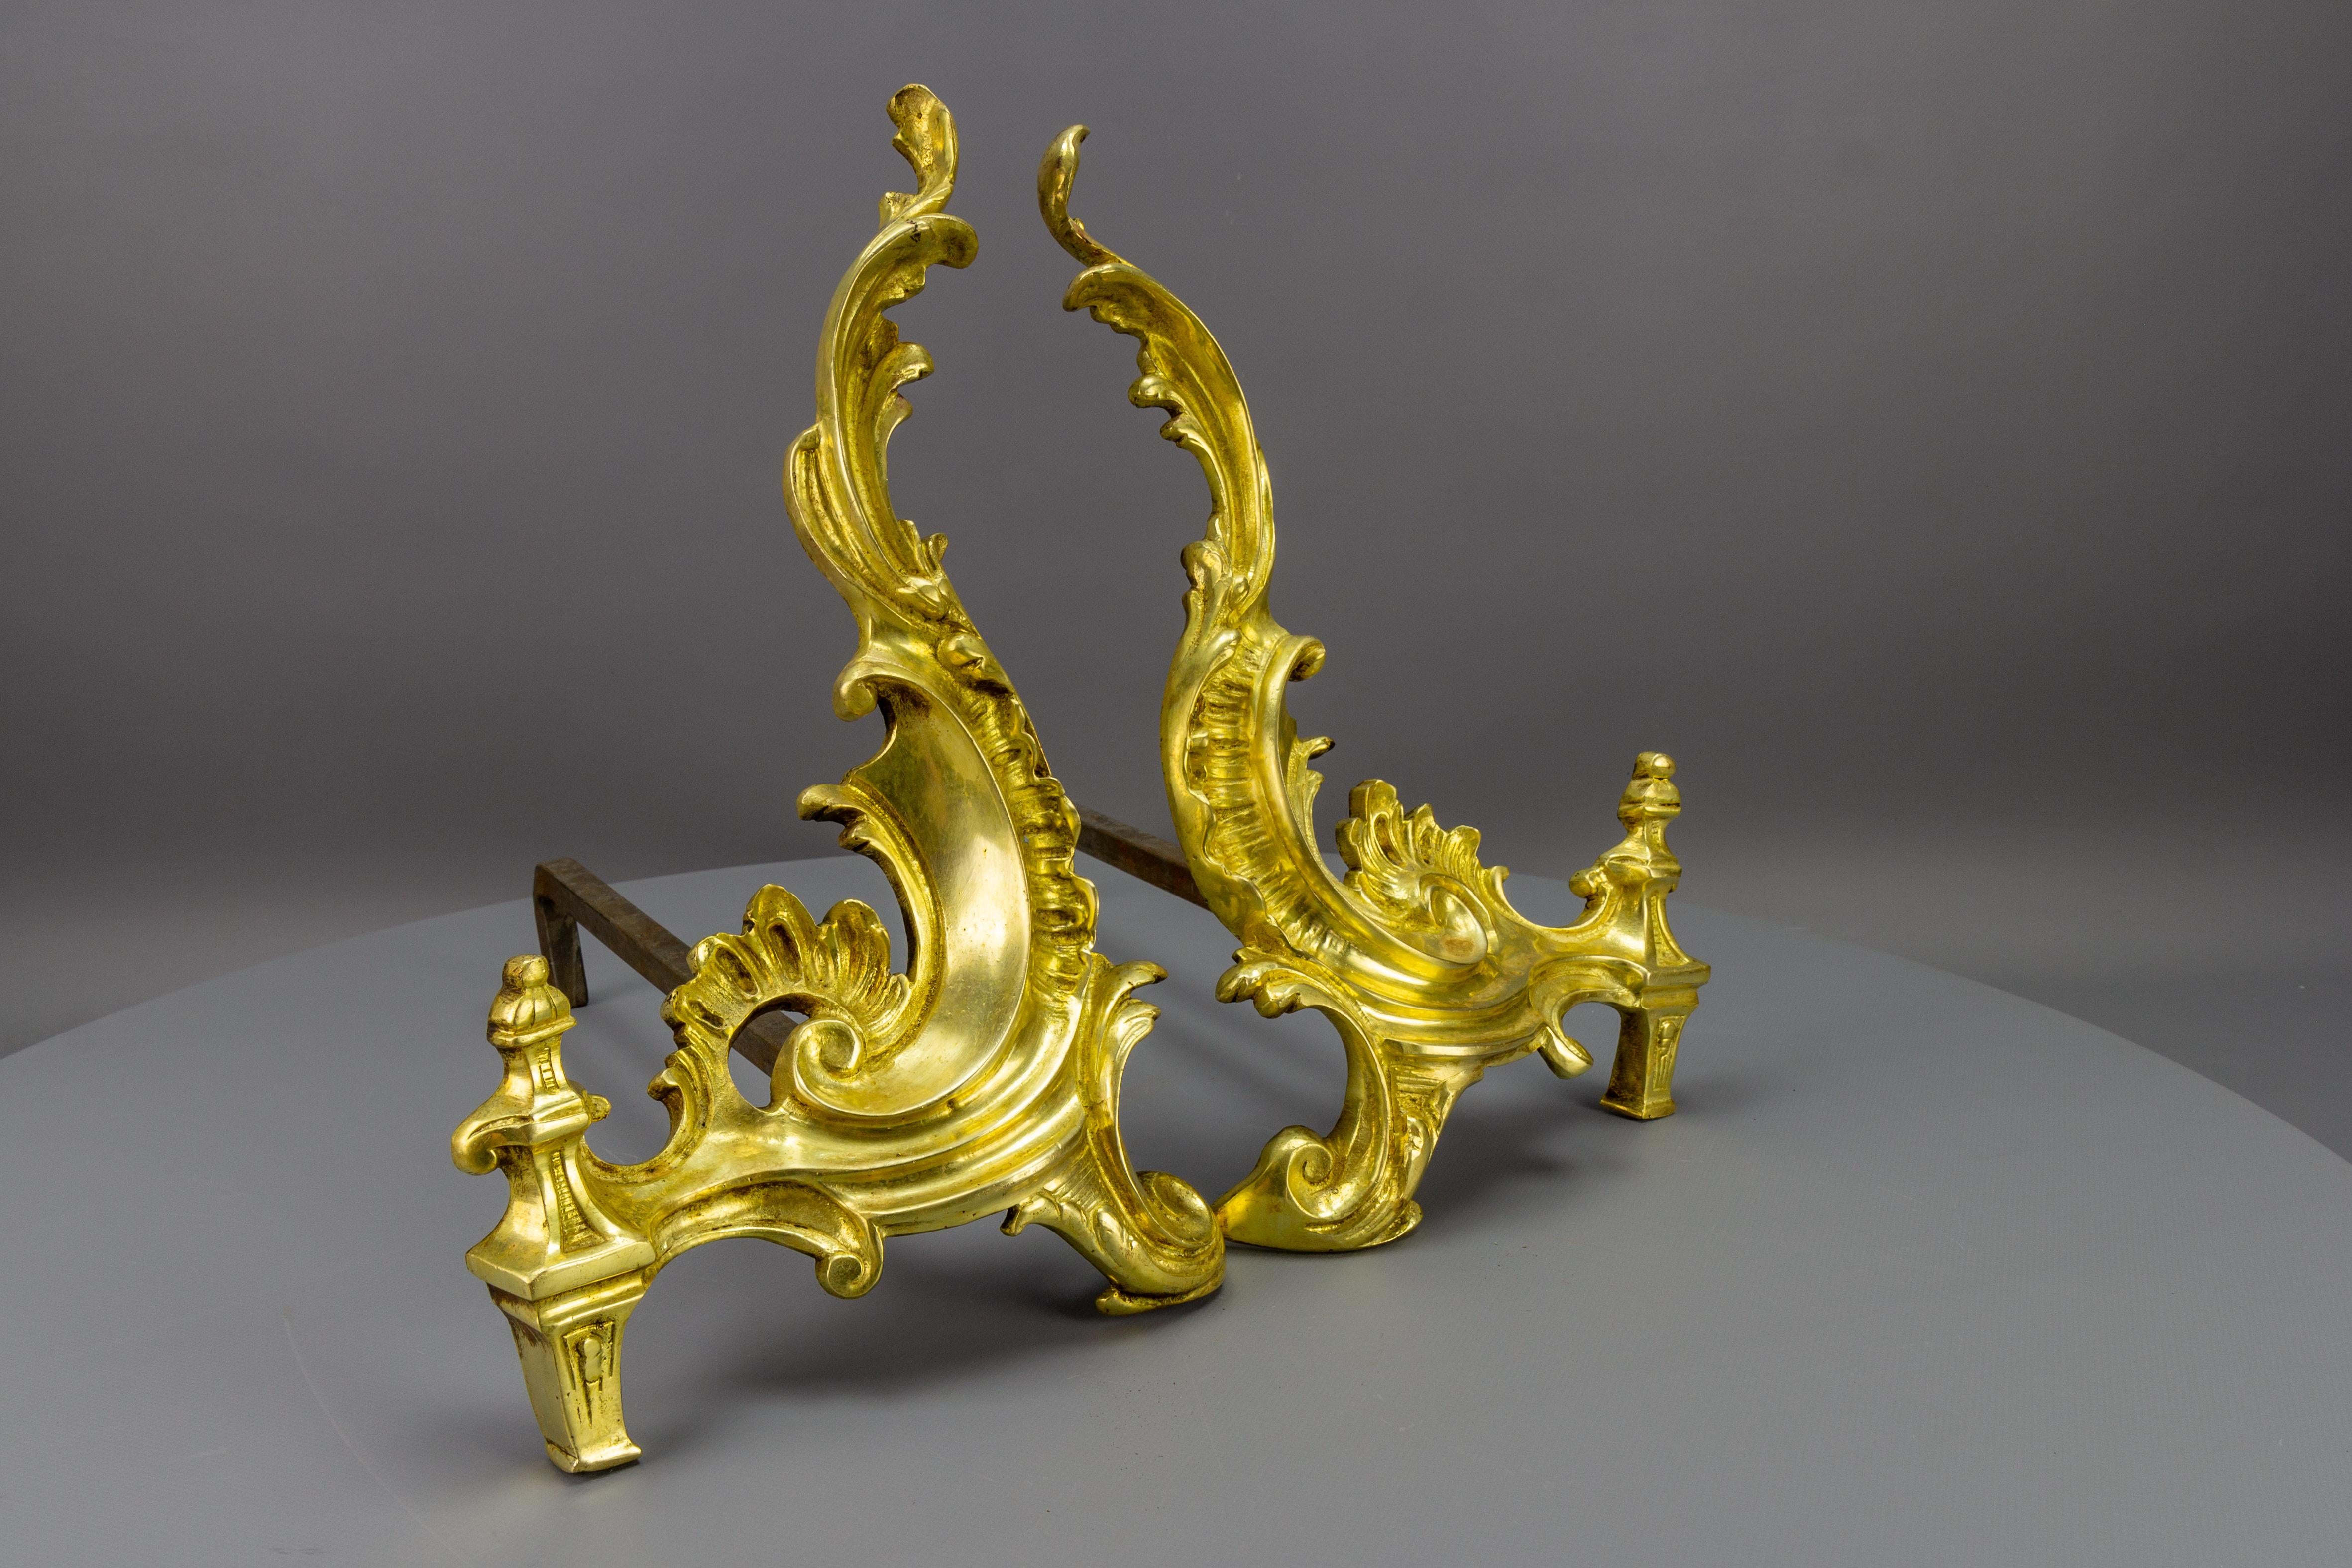 A pair of antique Louis XV or Rococo style firedogs made of gilt bronze and iron, France, circa the 1910s. 
These marvelous firedogs or andirons feature gilt bronze construction of typical Rococo design, of scroll shape with scrolling foliate and